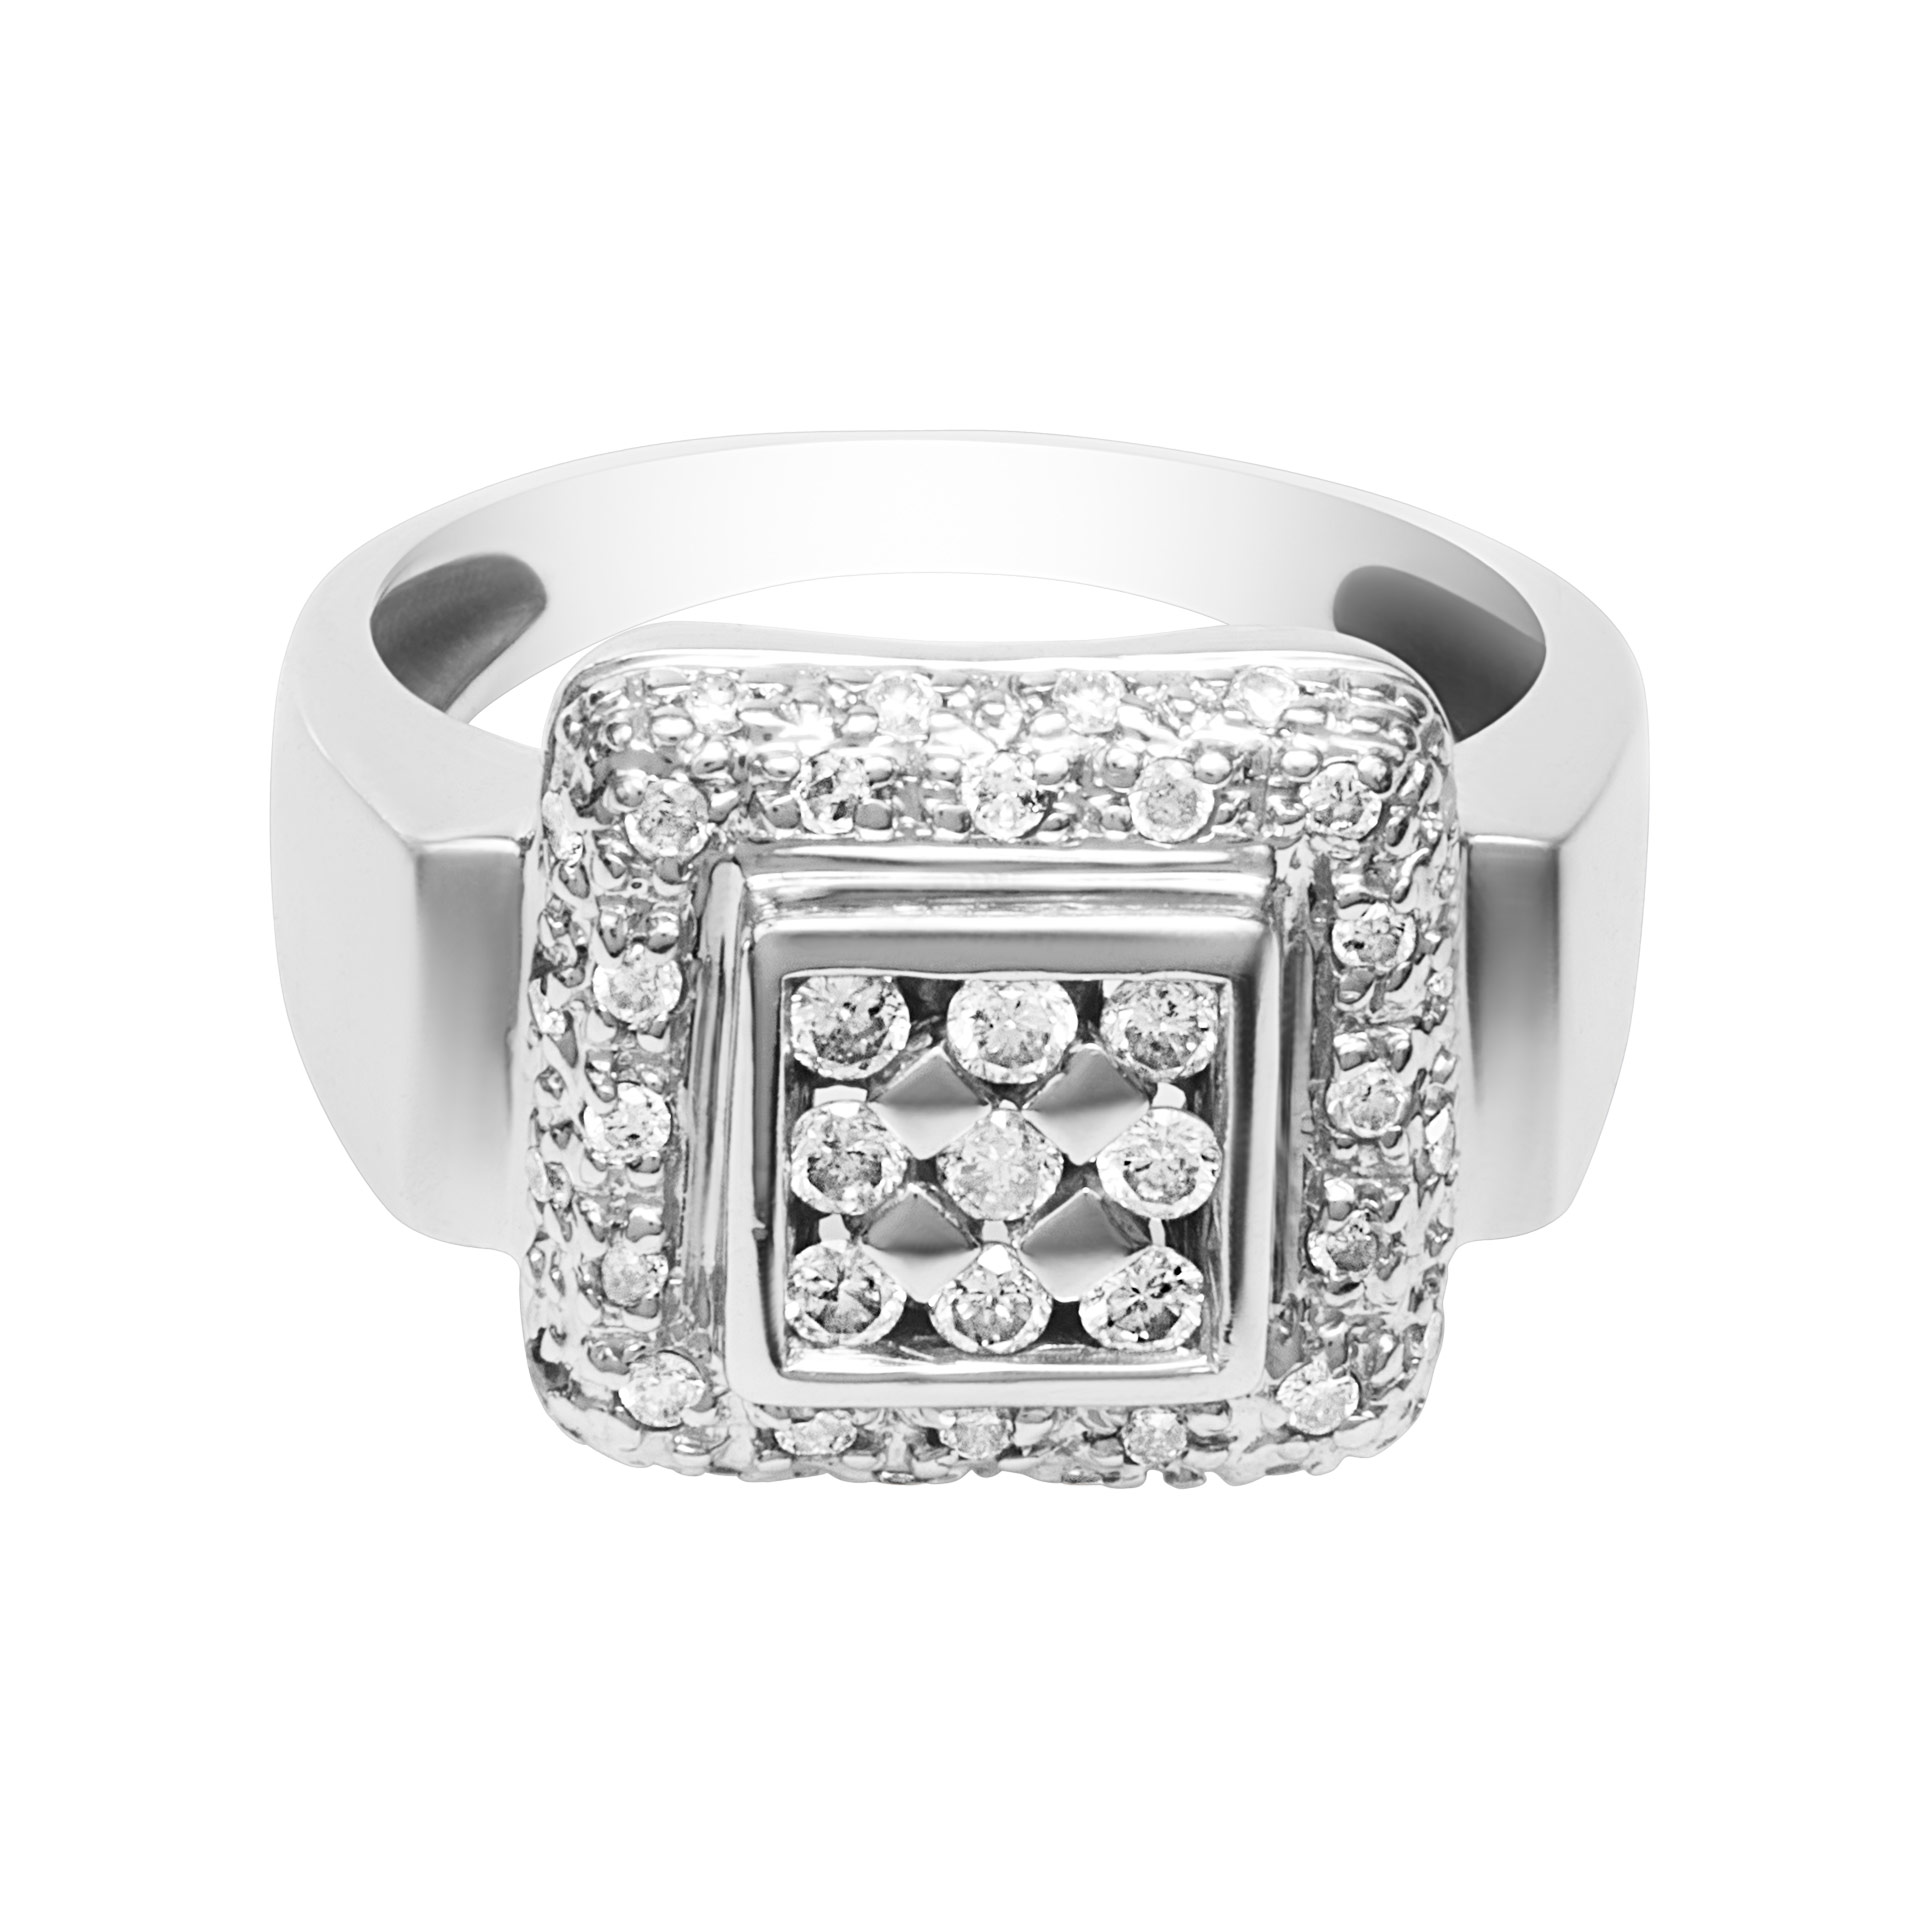 Modern style diamond ring in 18k white gold. 0.50 carats in clean white diamonds